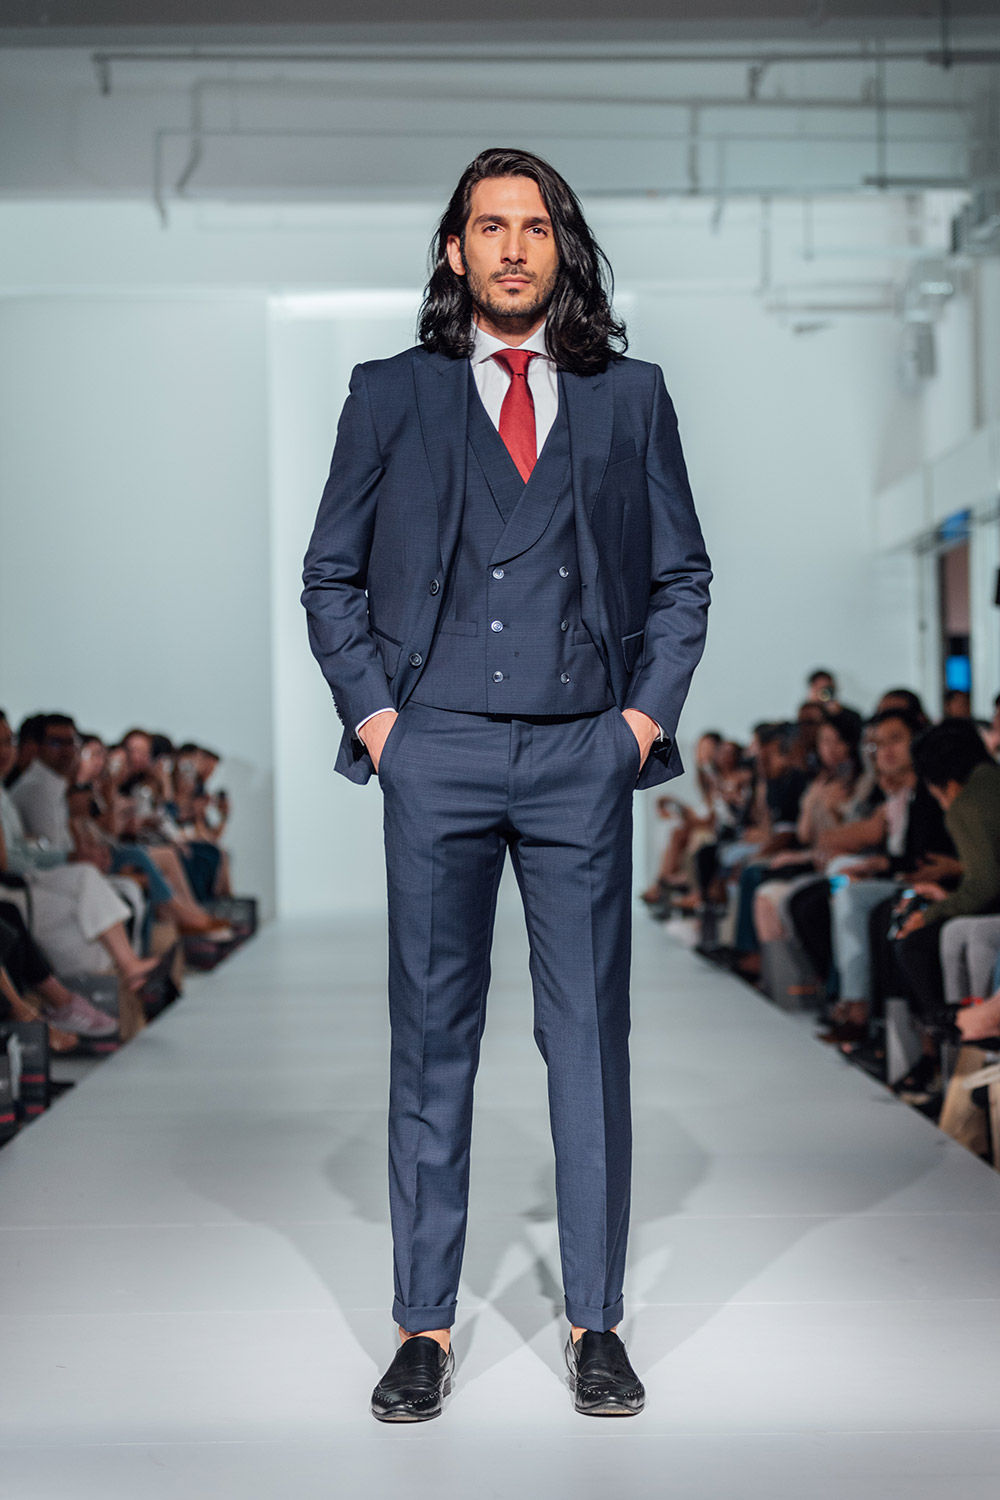 Sacoor Brothers Fall 2019 Collection at WAF2019. www.theweddingnotebook.com